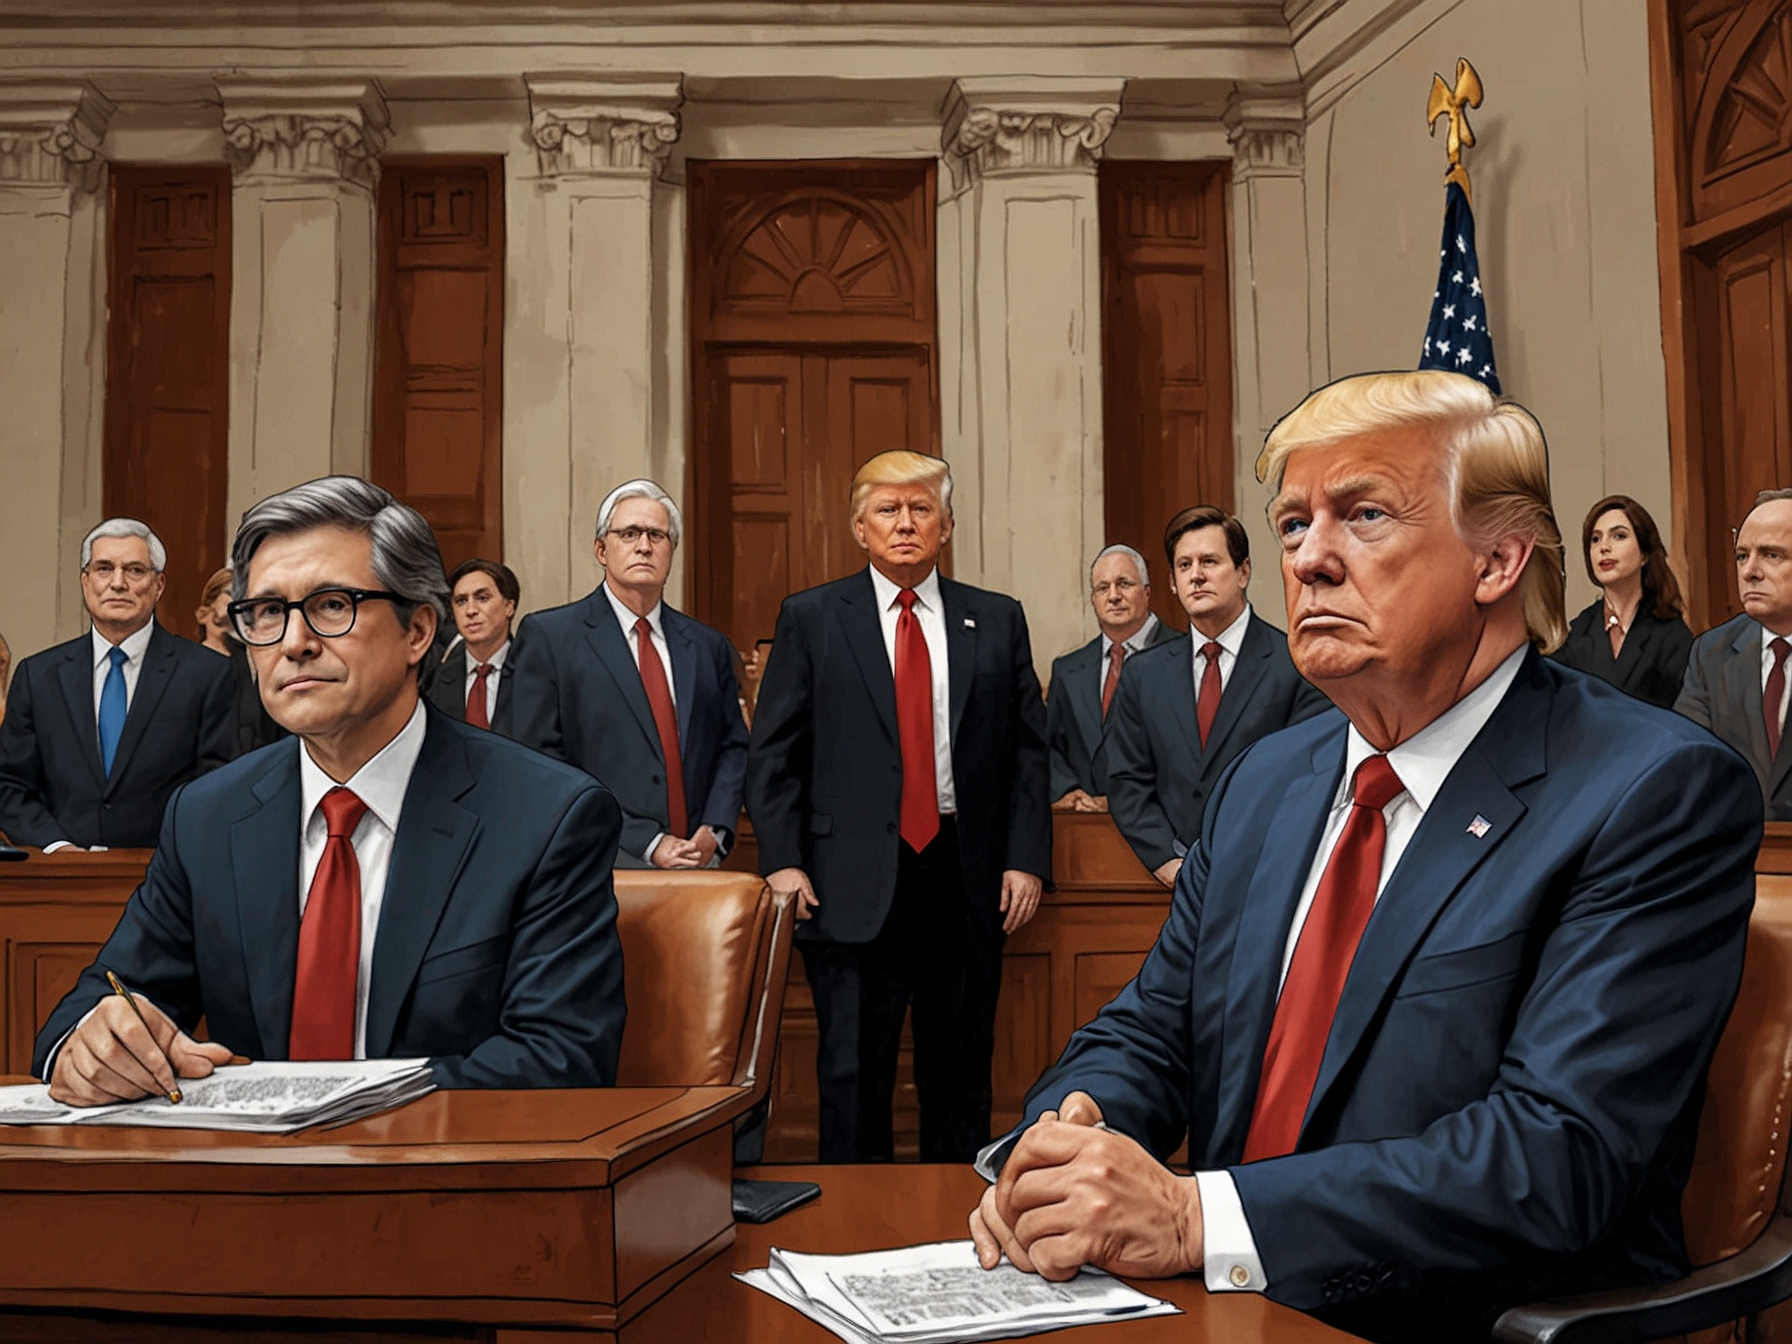 Former President Trump’s legal team in a courtroom scene, emphasizing the special master decision and the debate over judicial bias and procedural fairness.